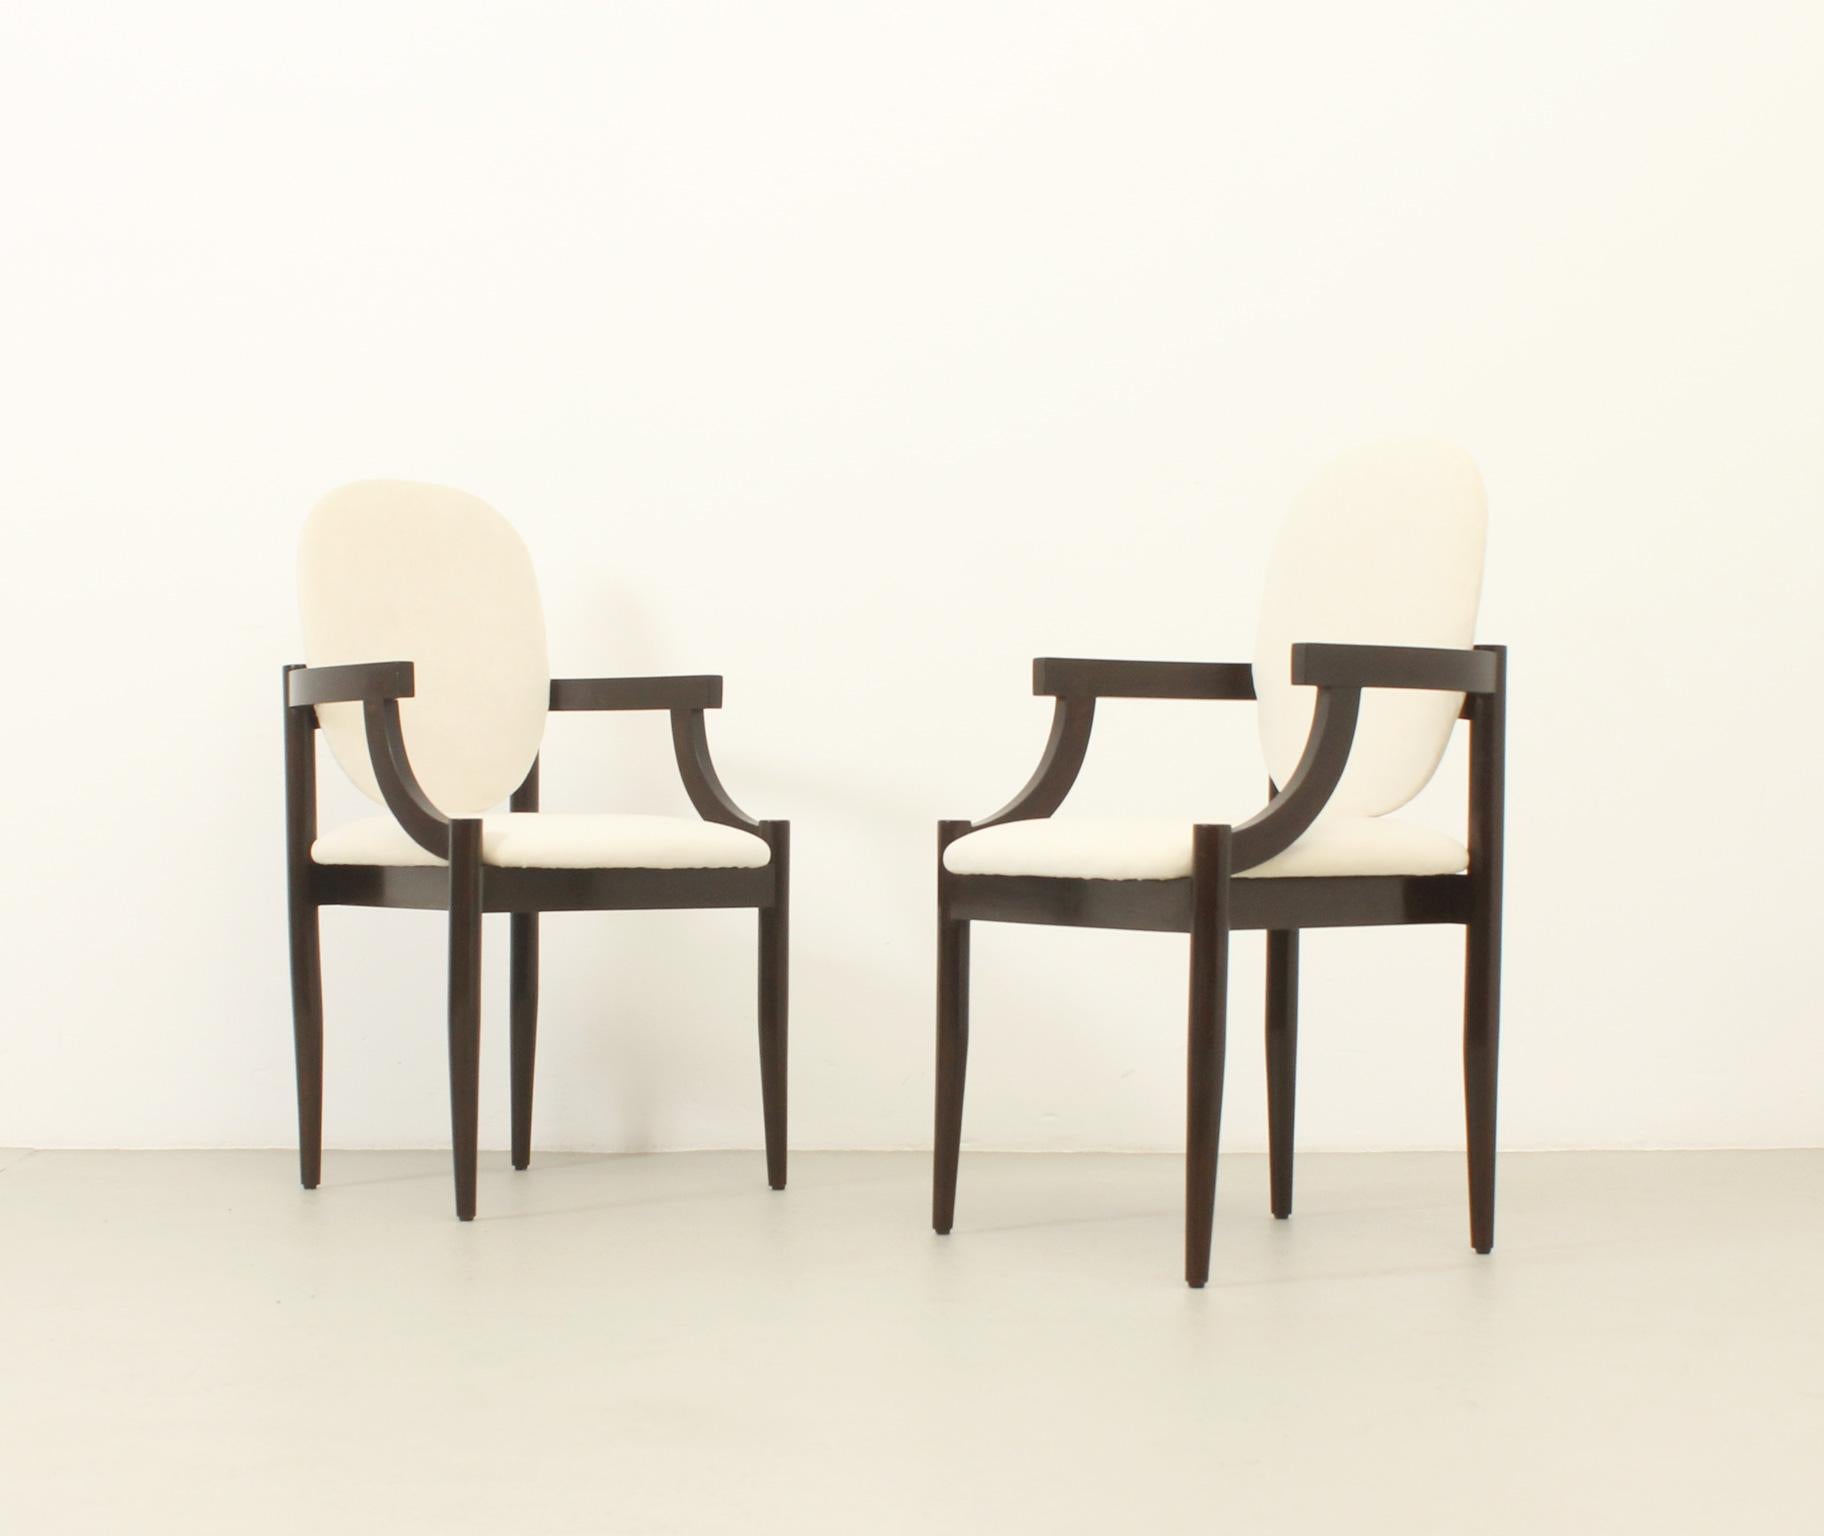 Six Reno Chairs by Spanish Architects Correa & Milá, 1961 For Sale 6